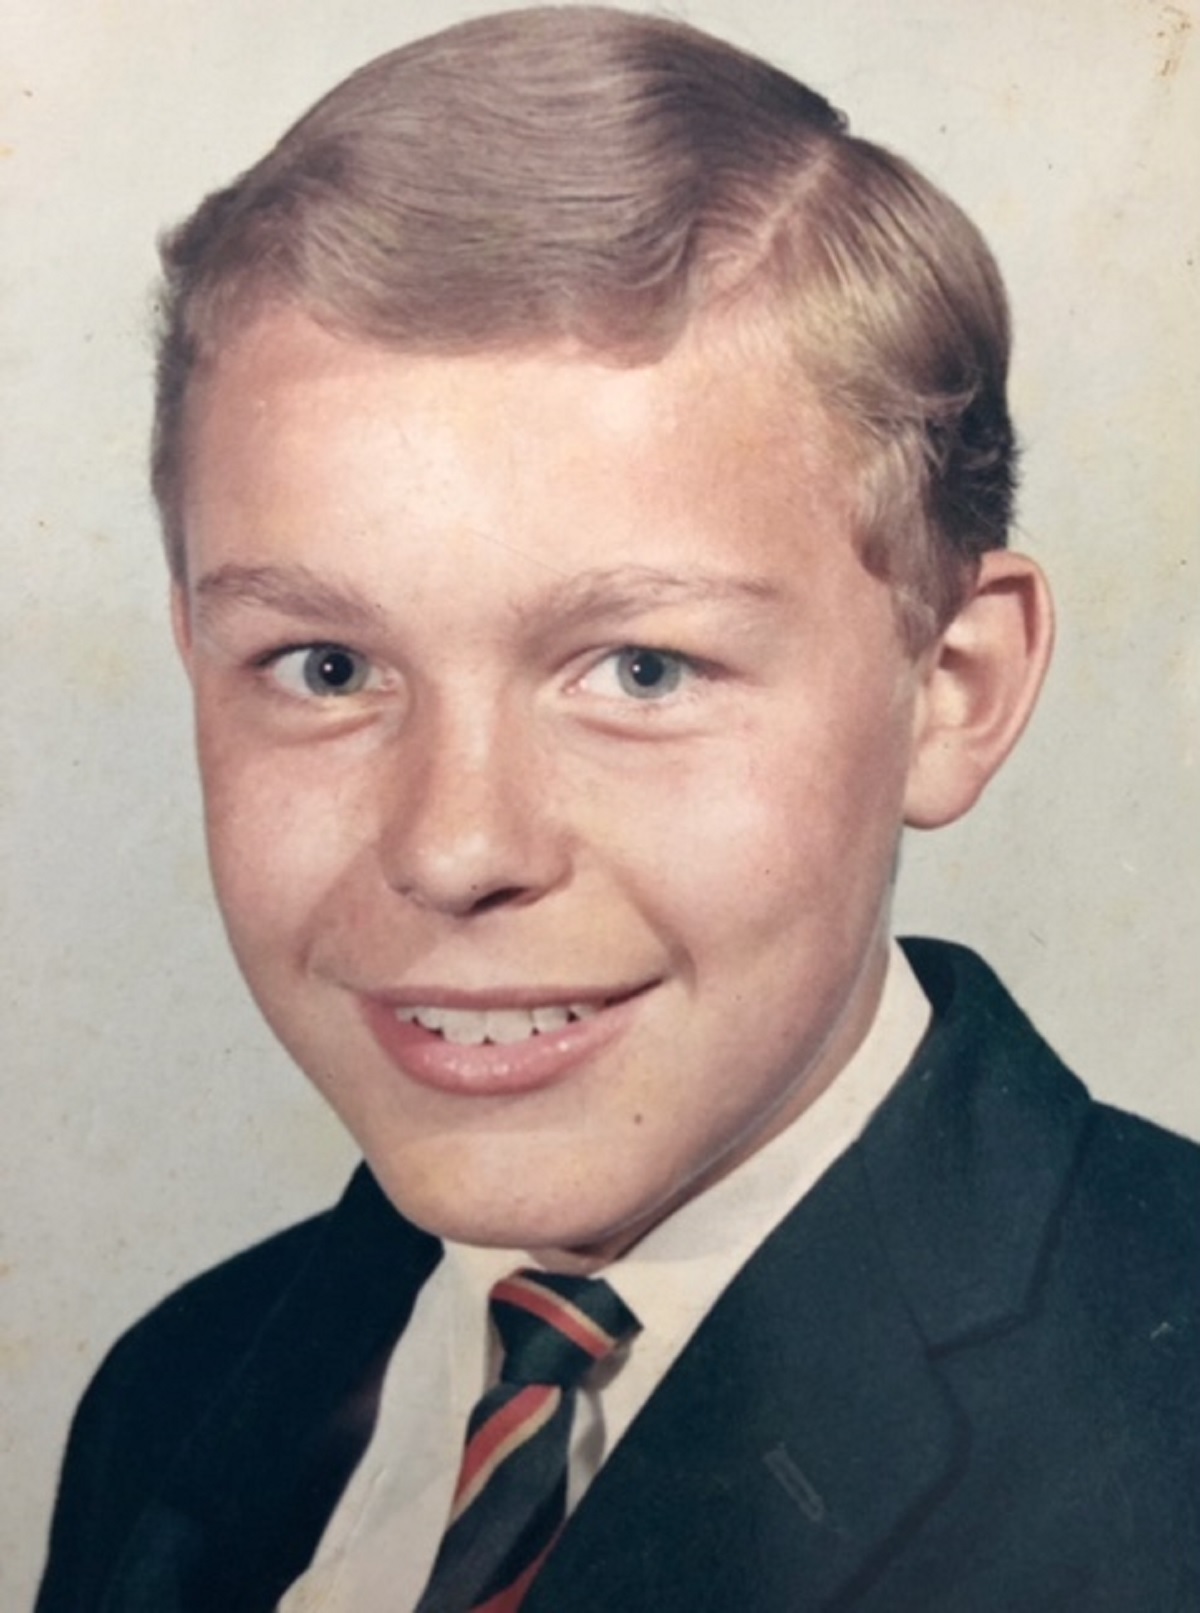 Official photo - this picture of Roger was taken during his first year at the Gilberd School, in 1966/7